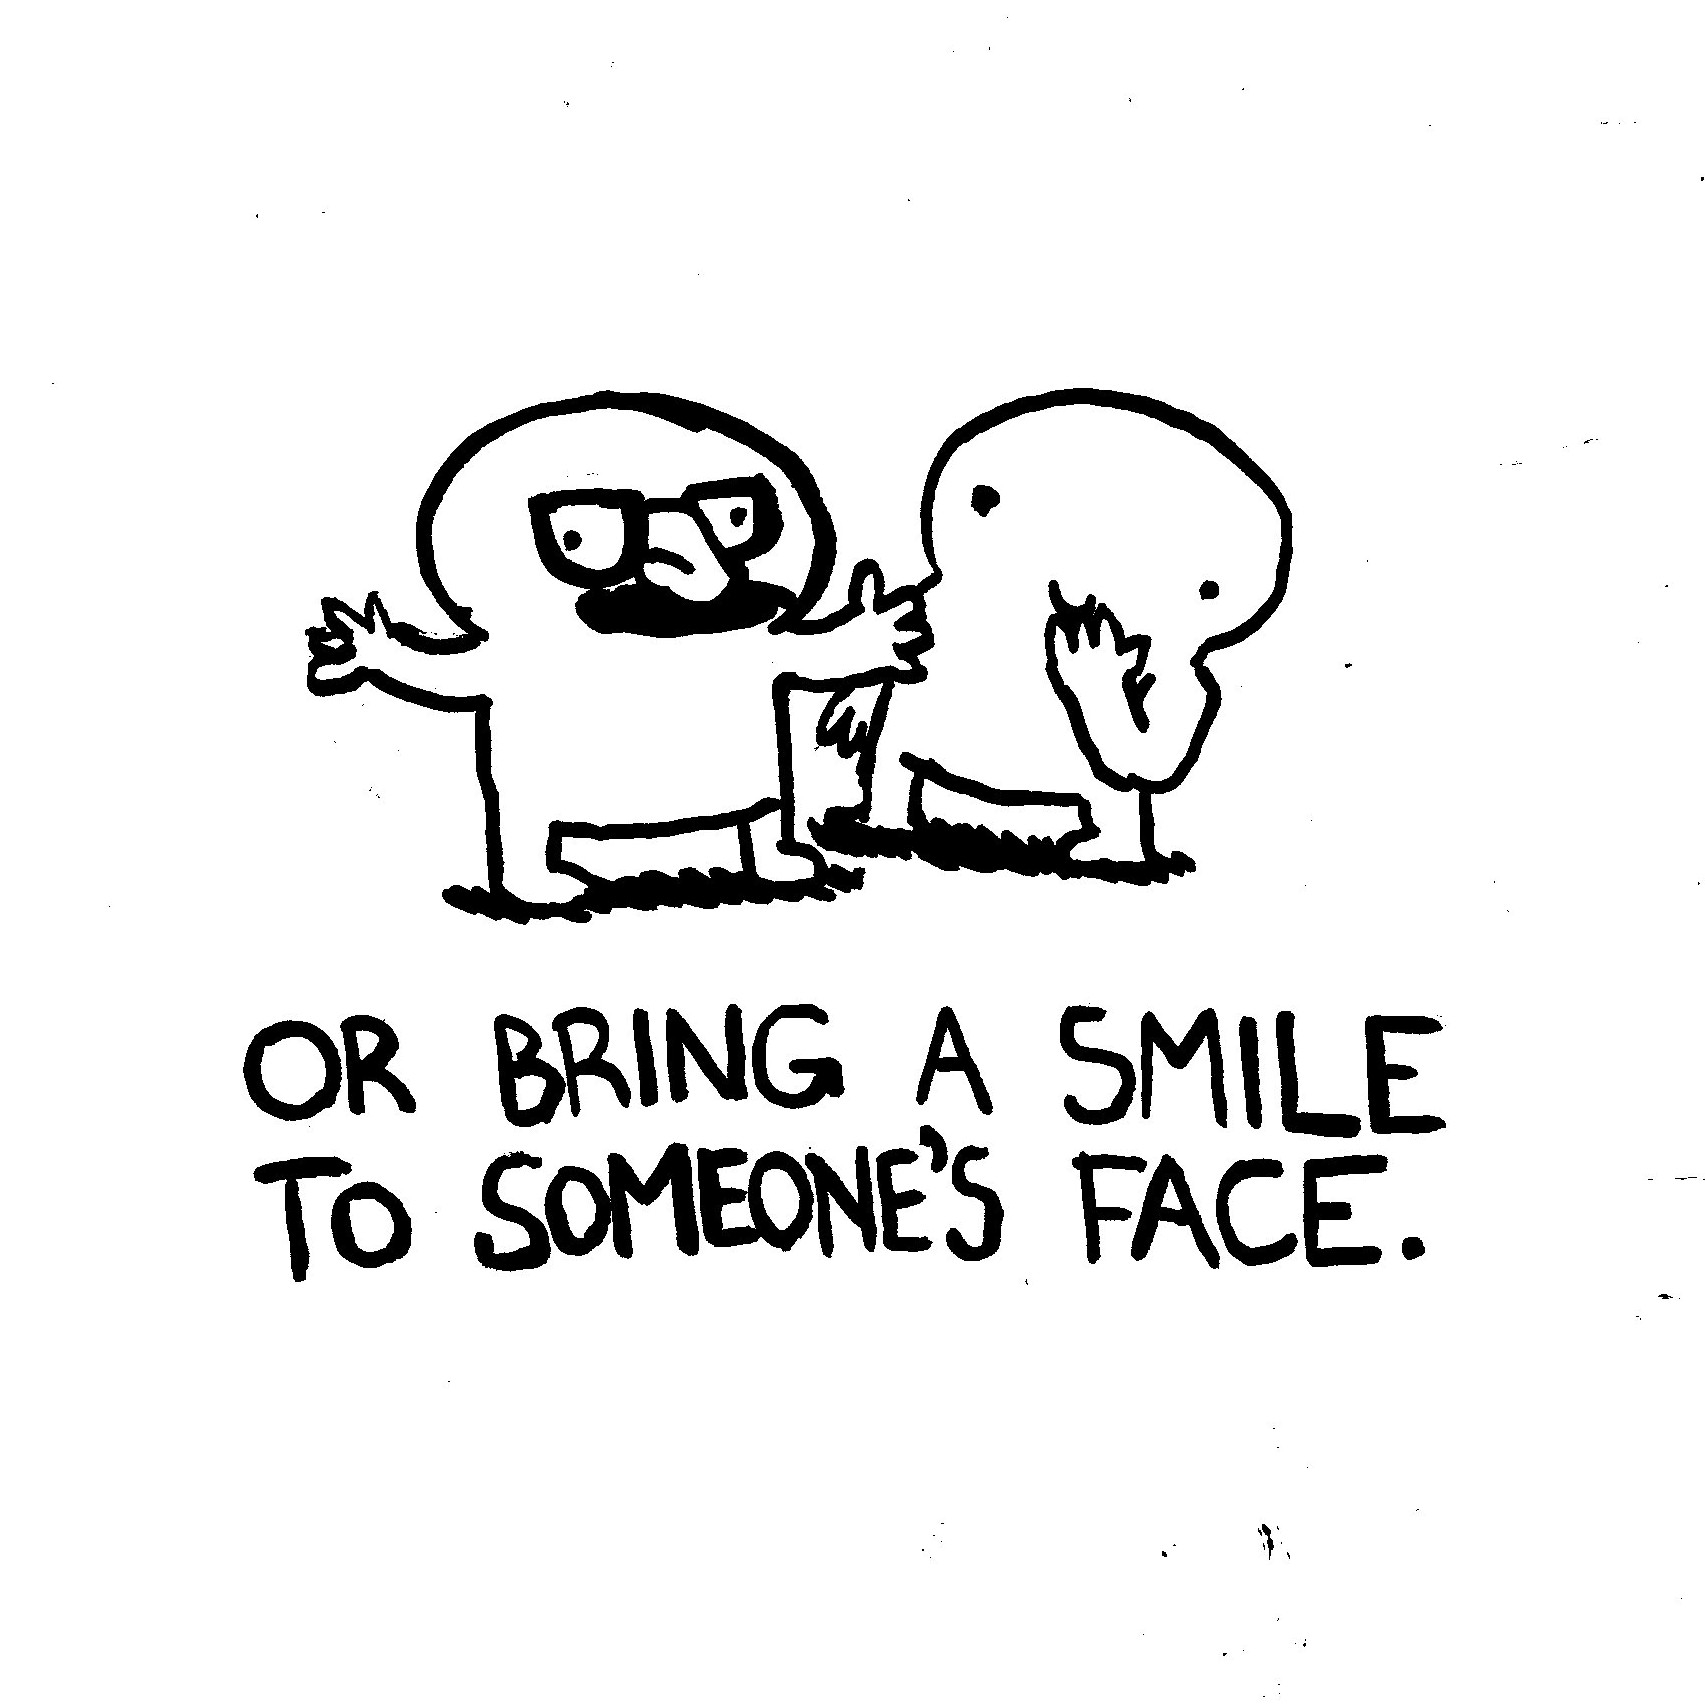 Or bring a smile to someone's face.